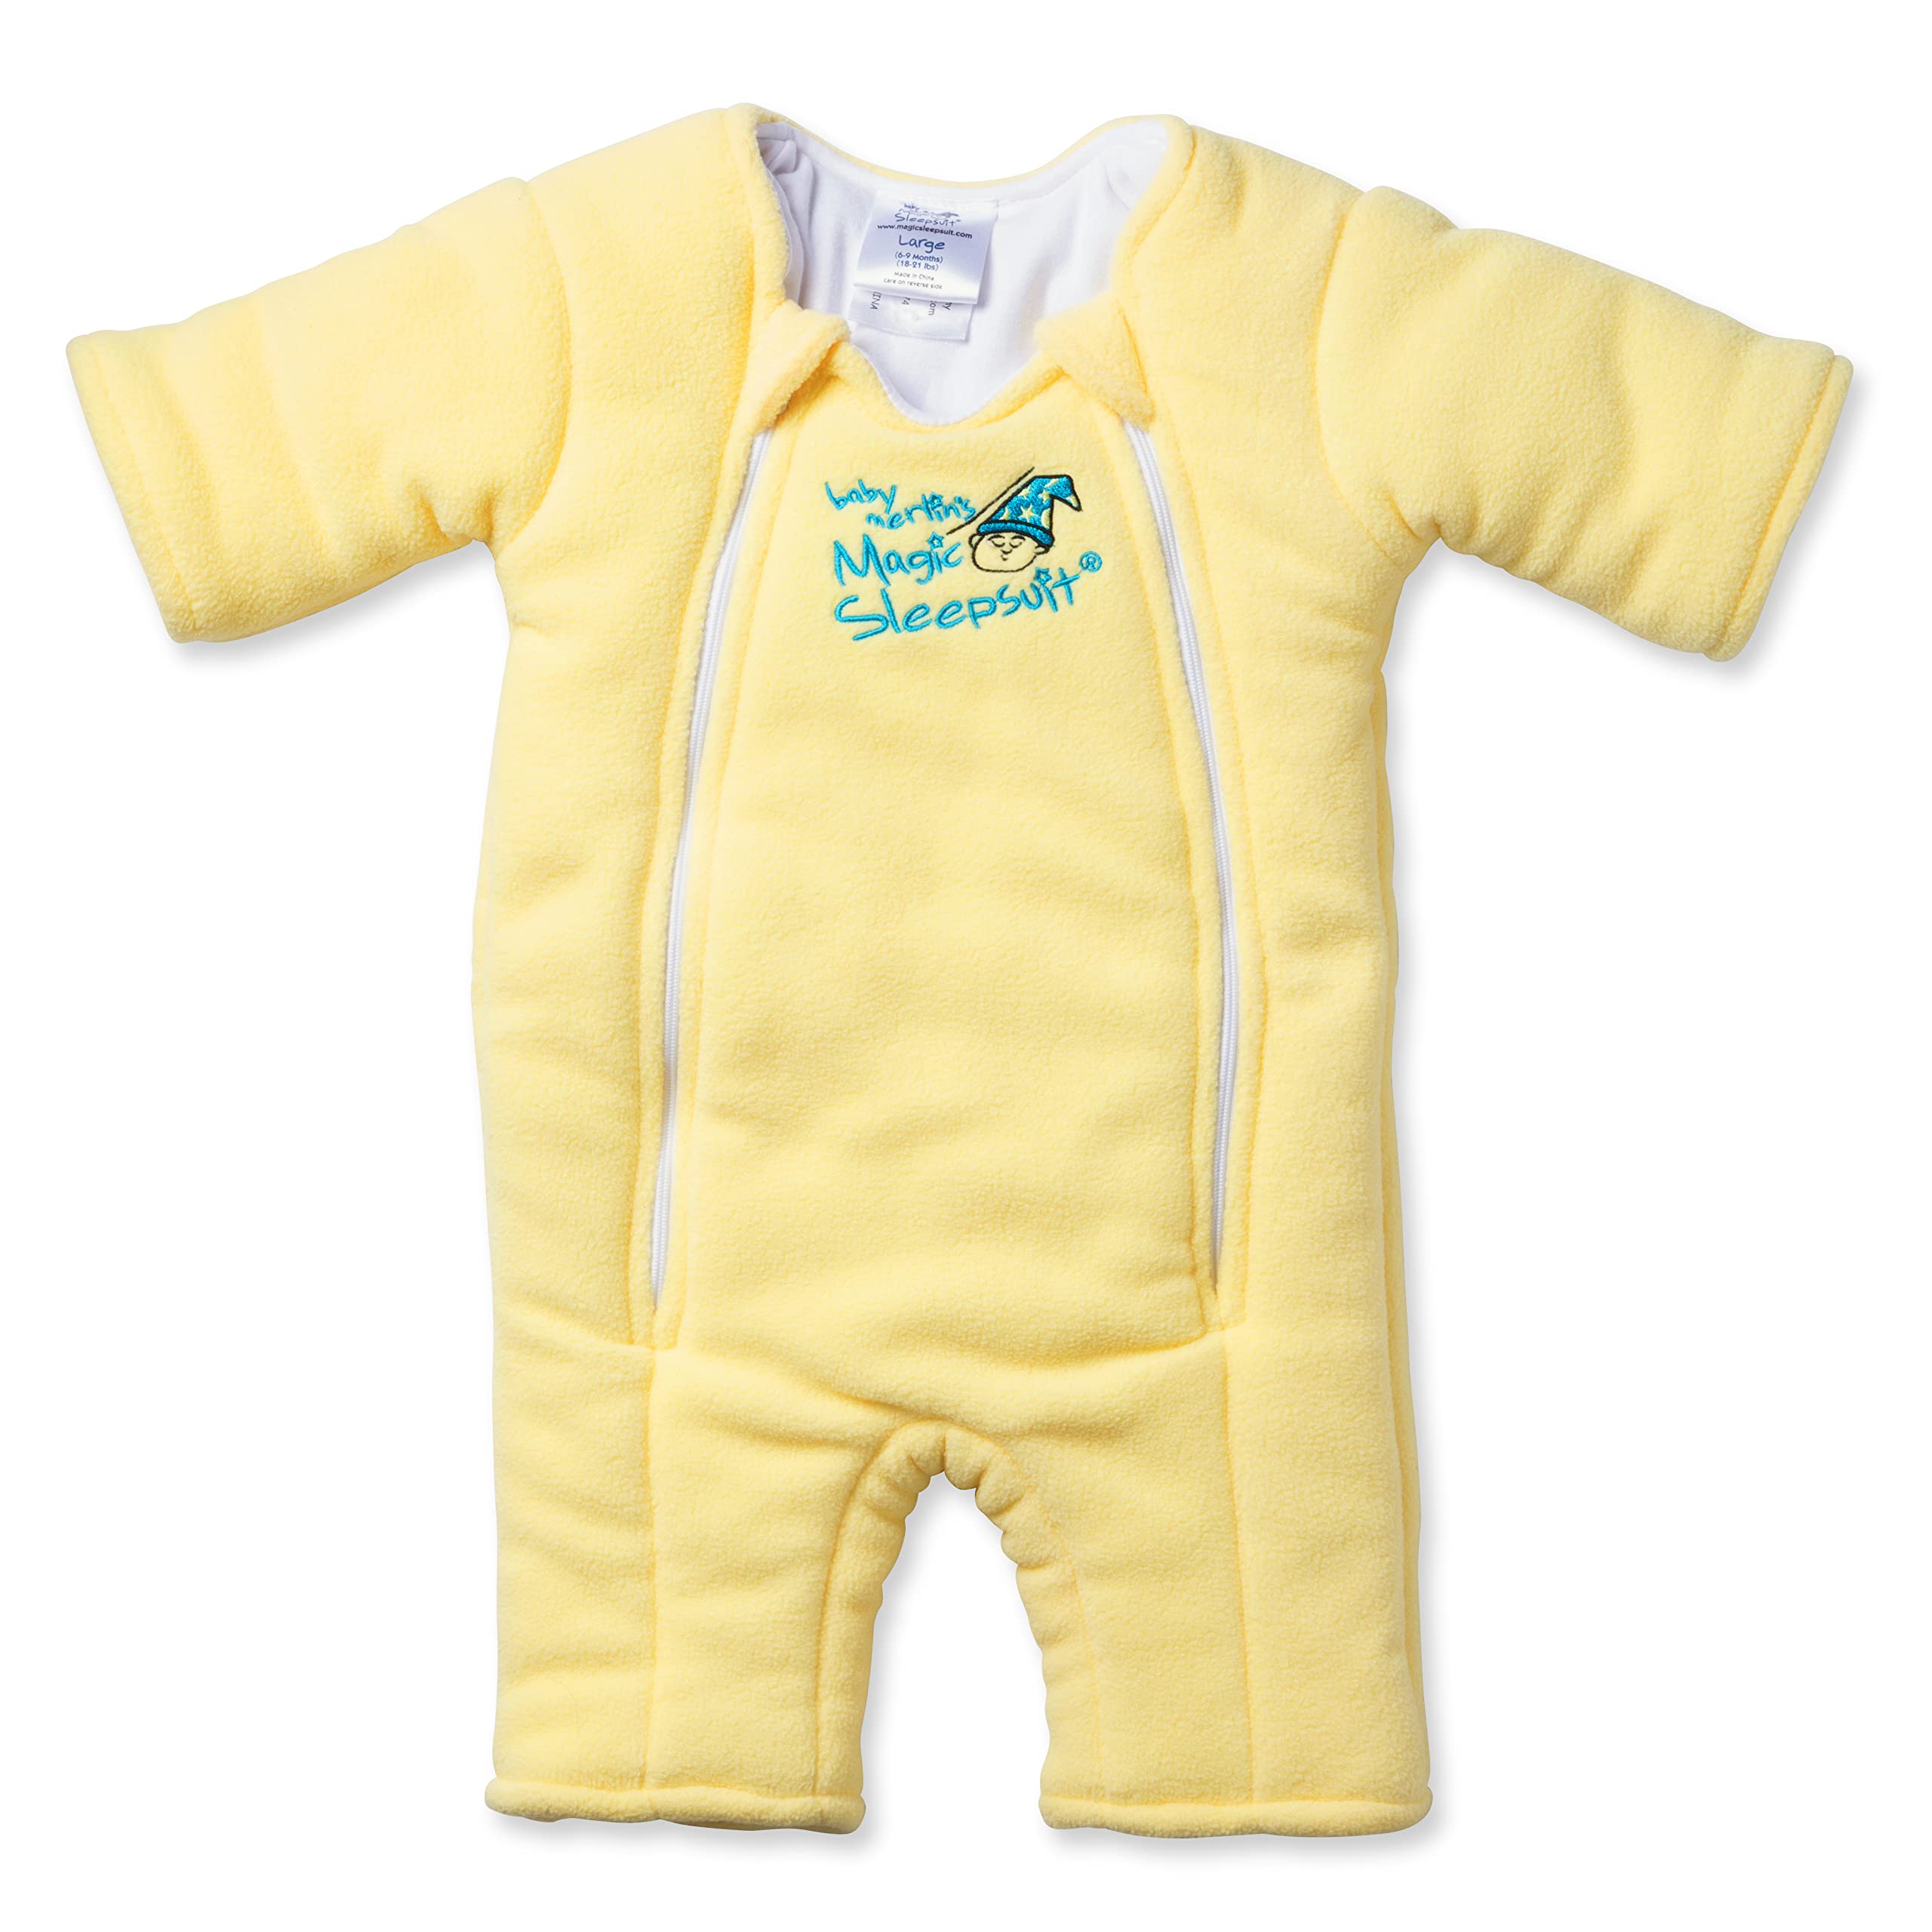 Baby Merlin's Magic Sleepsuit - Swaddle Transition Product - Microfleece